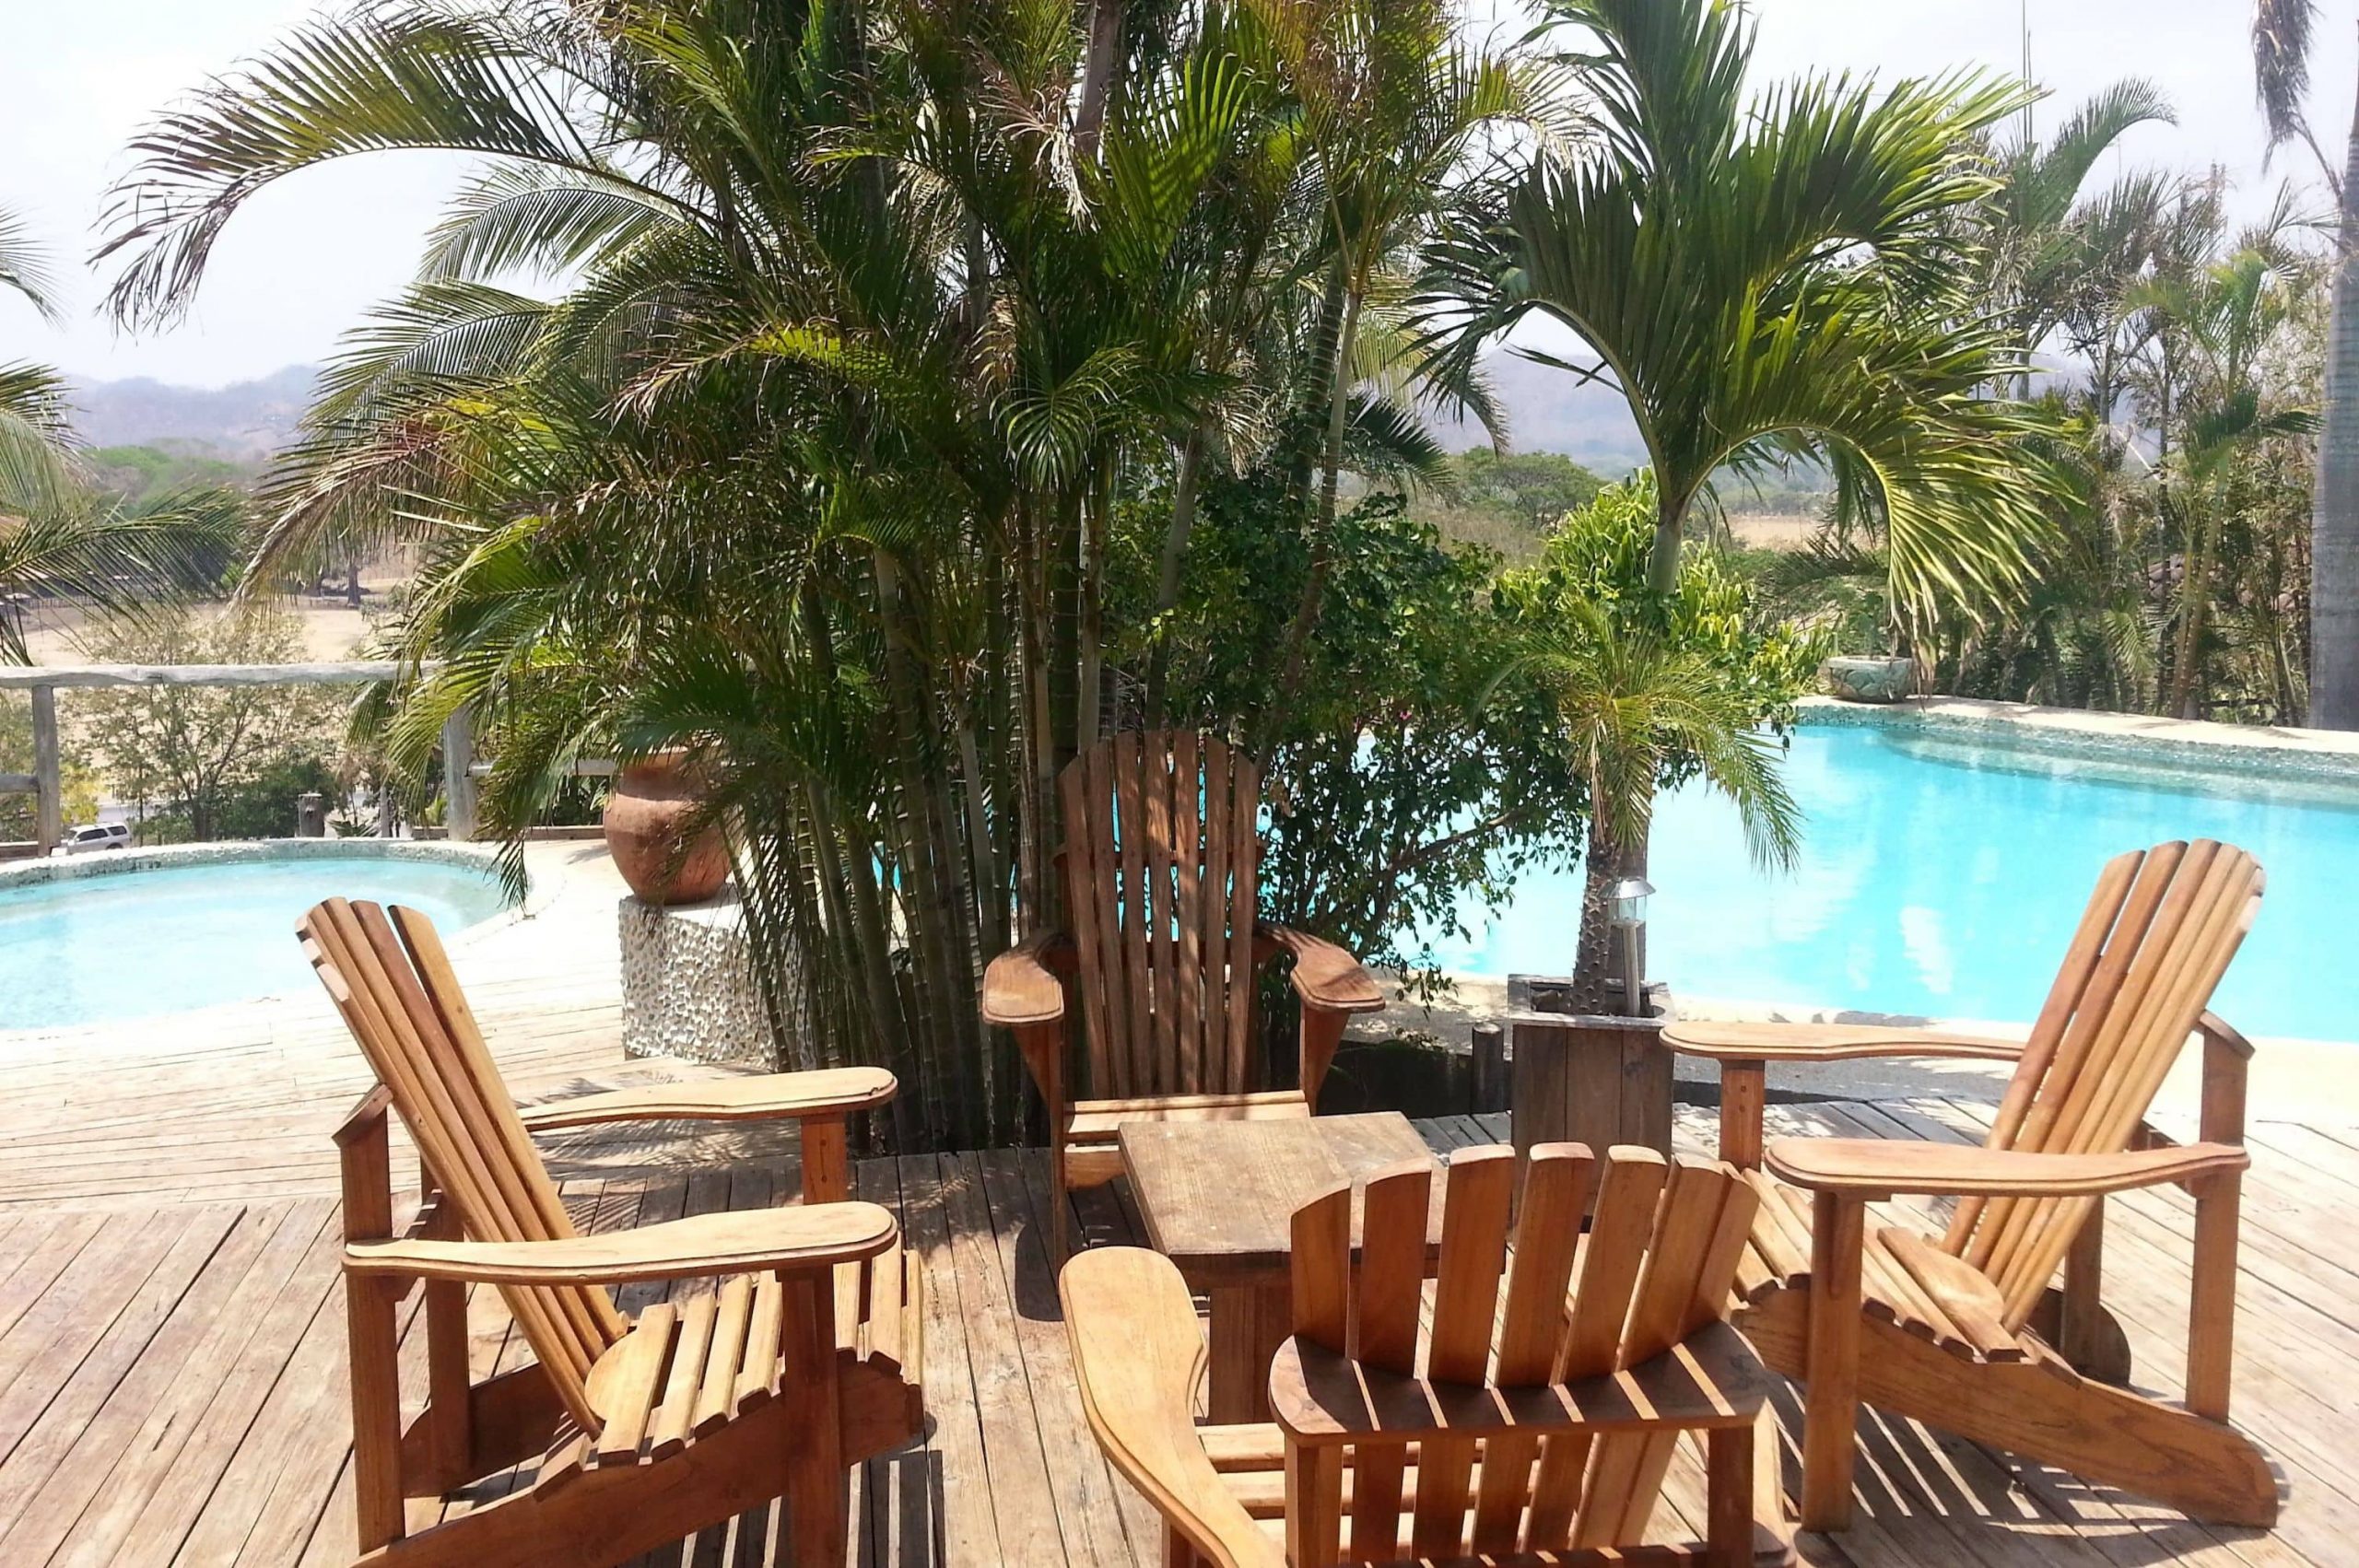 Poolside at the El-Sabanero Eco Lodge with palm trees, a pool, hot tub, and wooden deck chairs and table for sun lounging and fun.